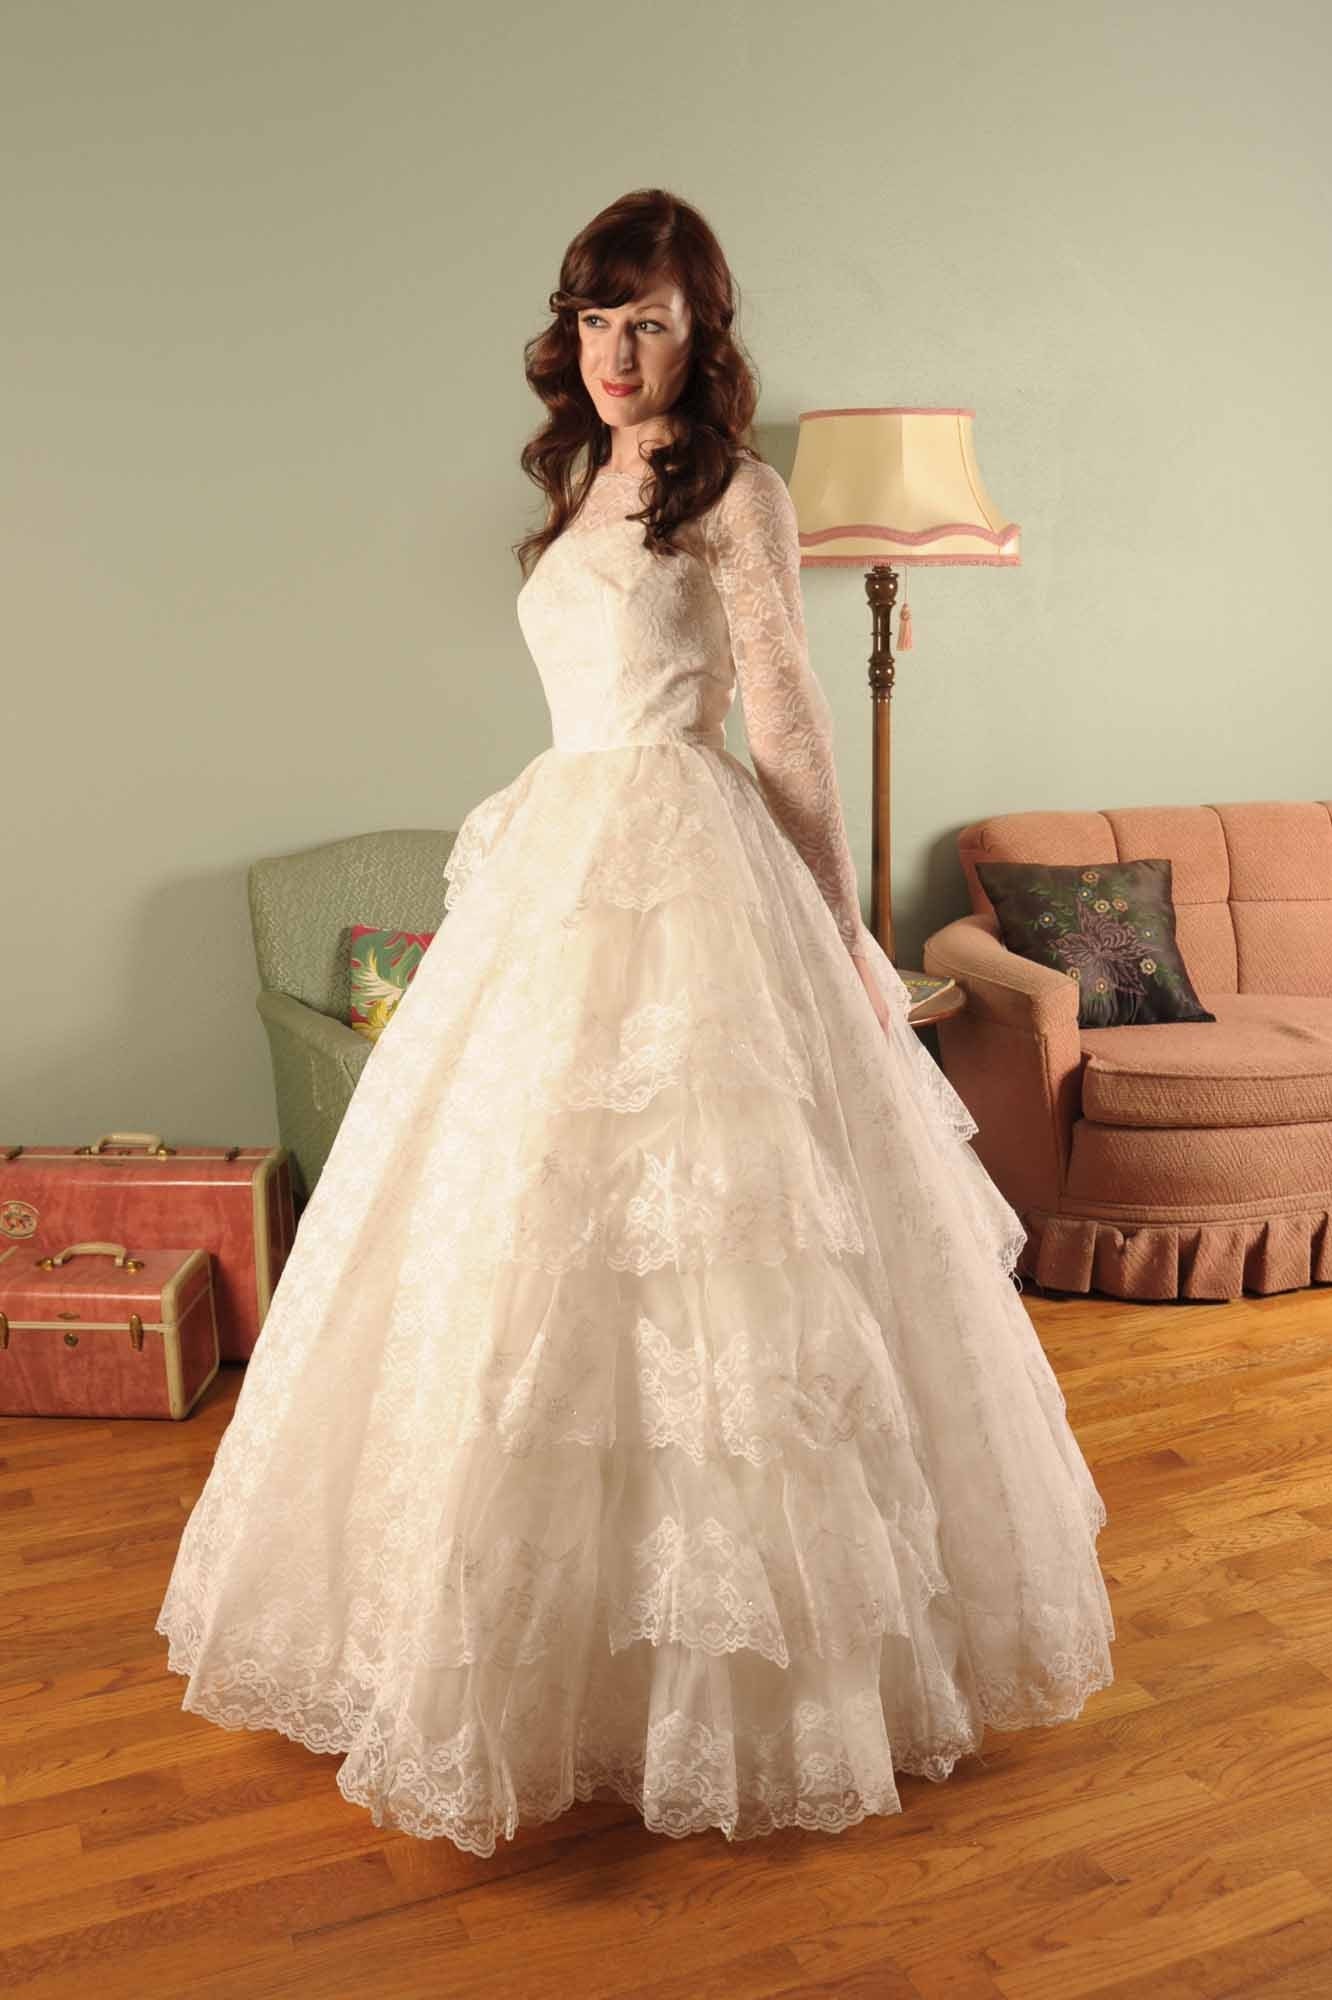 A 1950s Tulle and Lace White Wedding Dress with Four Decadent Tiered Layers